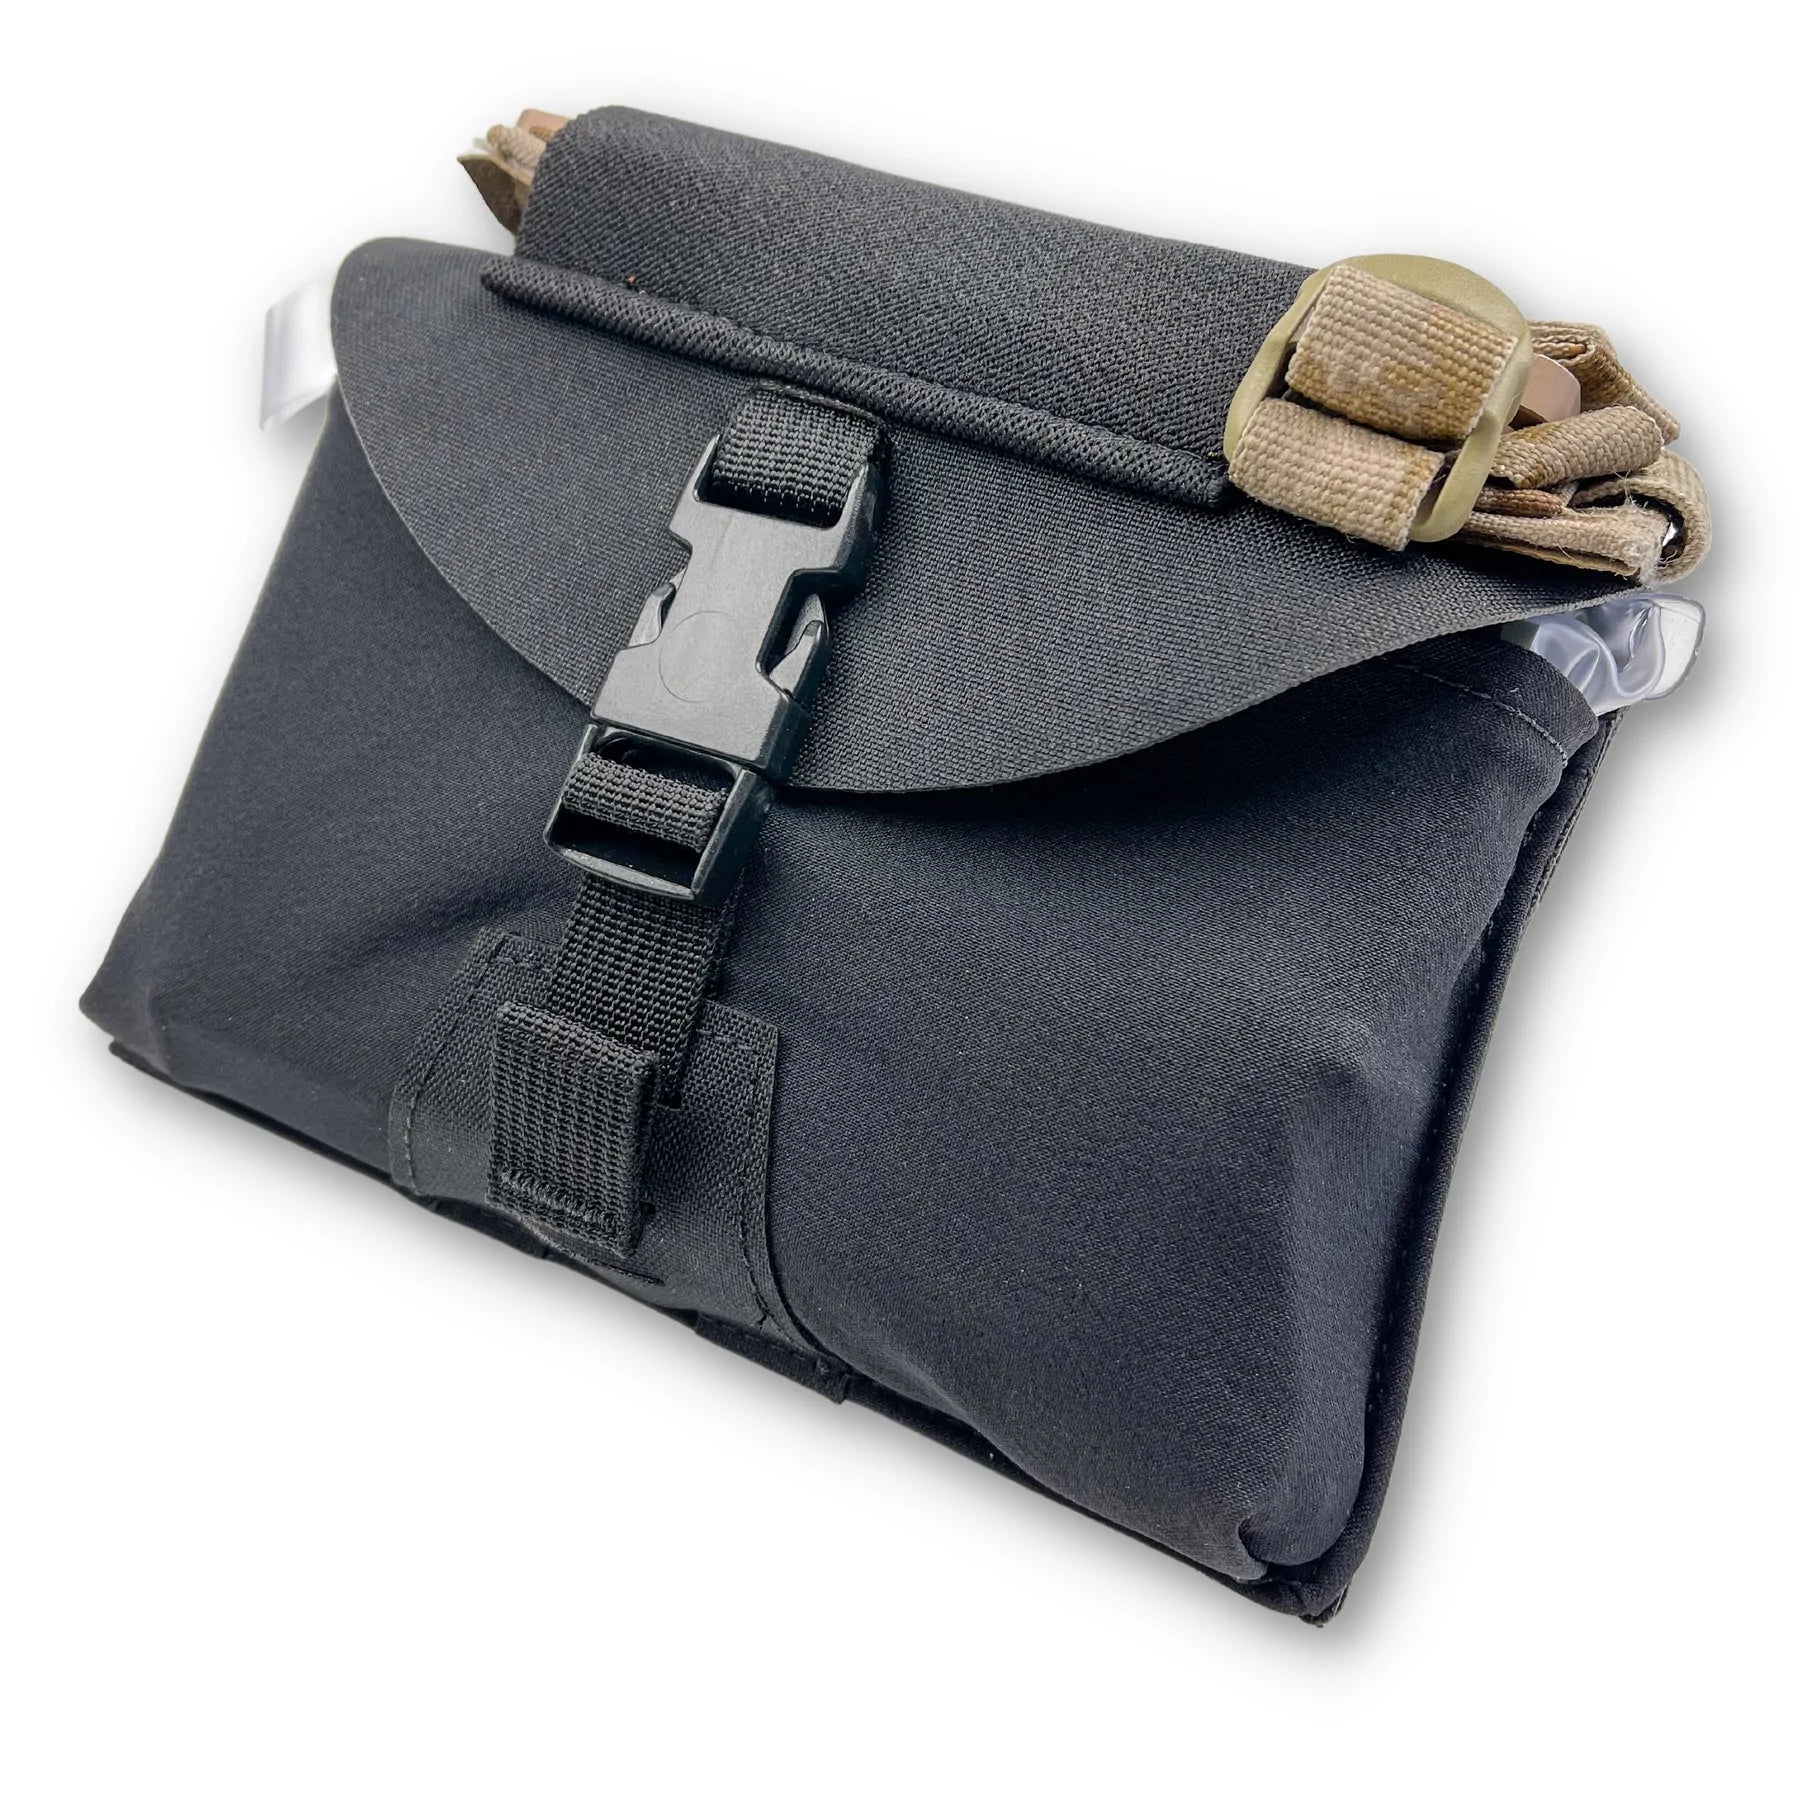 GBRS Group IFAS Pouch Pouch GBRS Group Black 